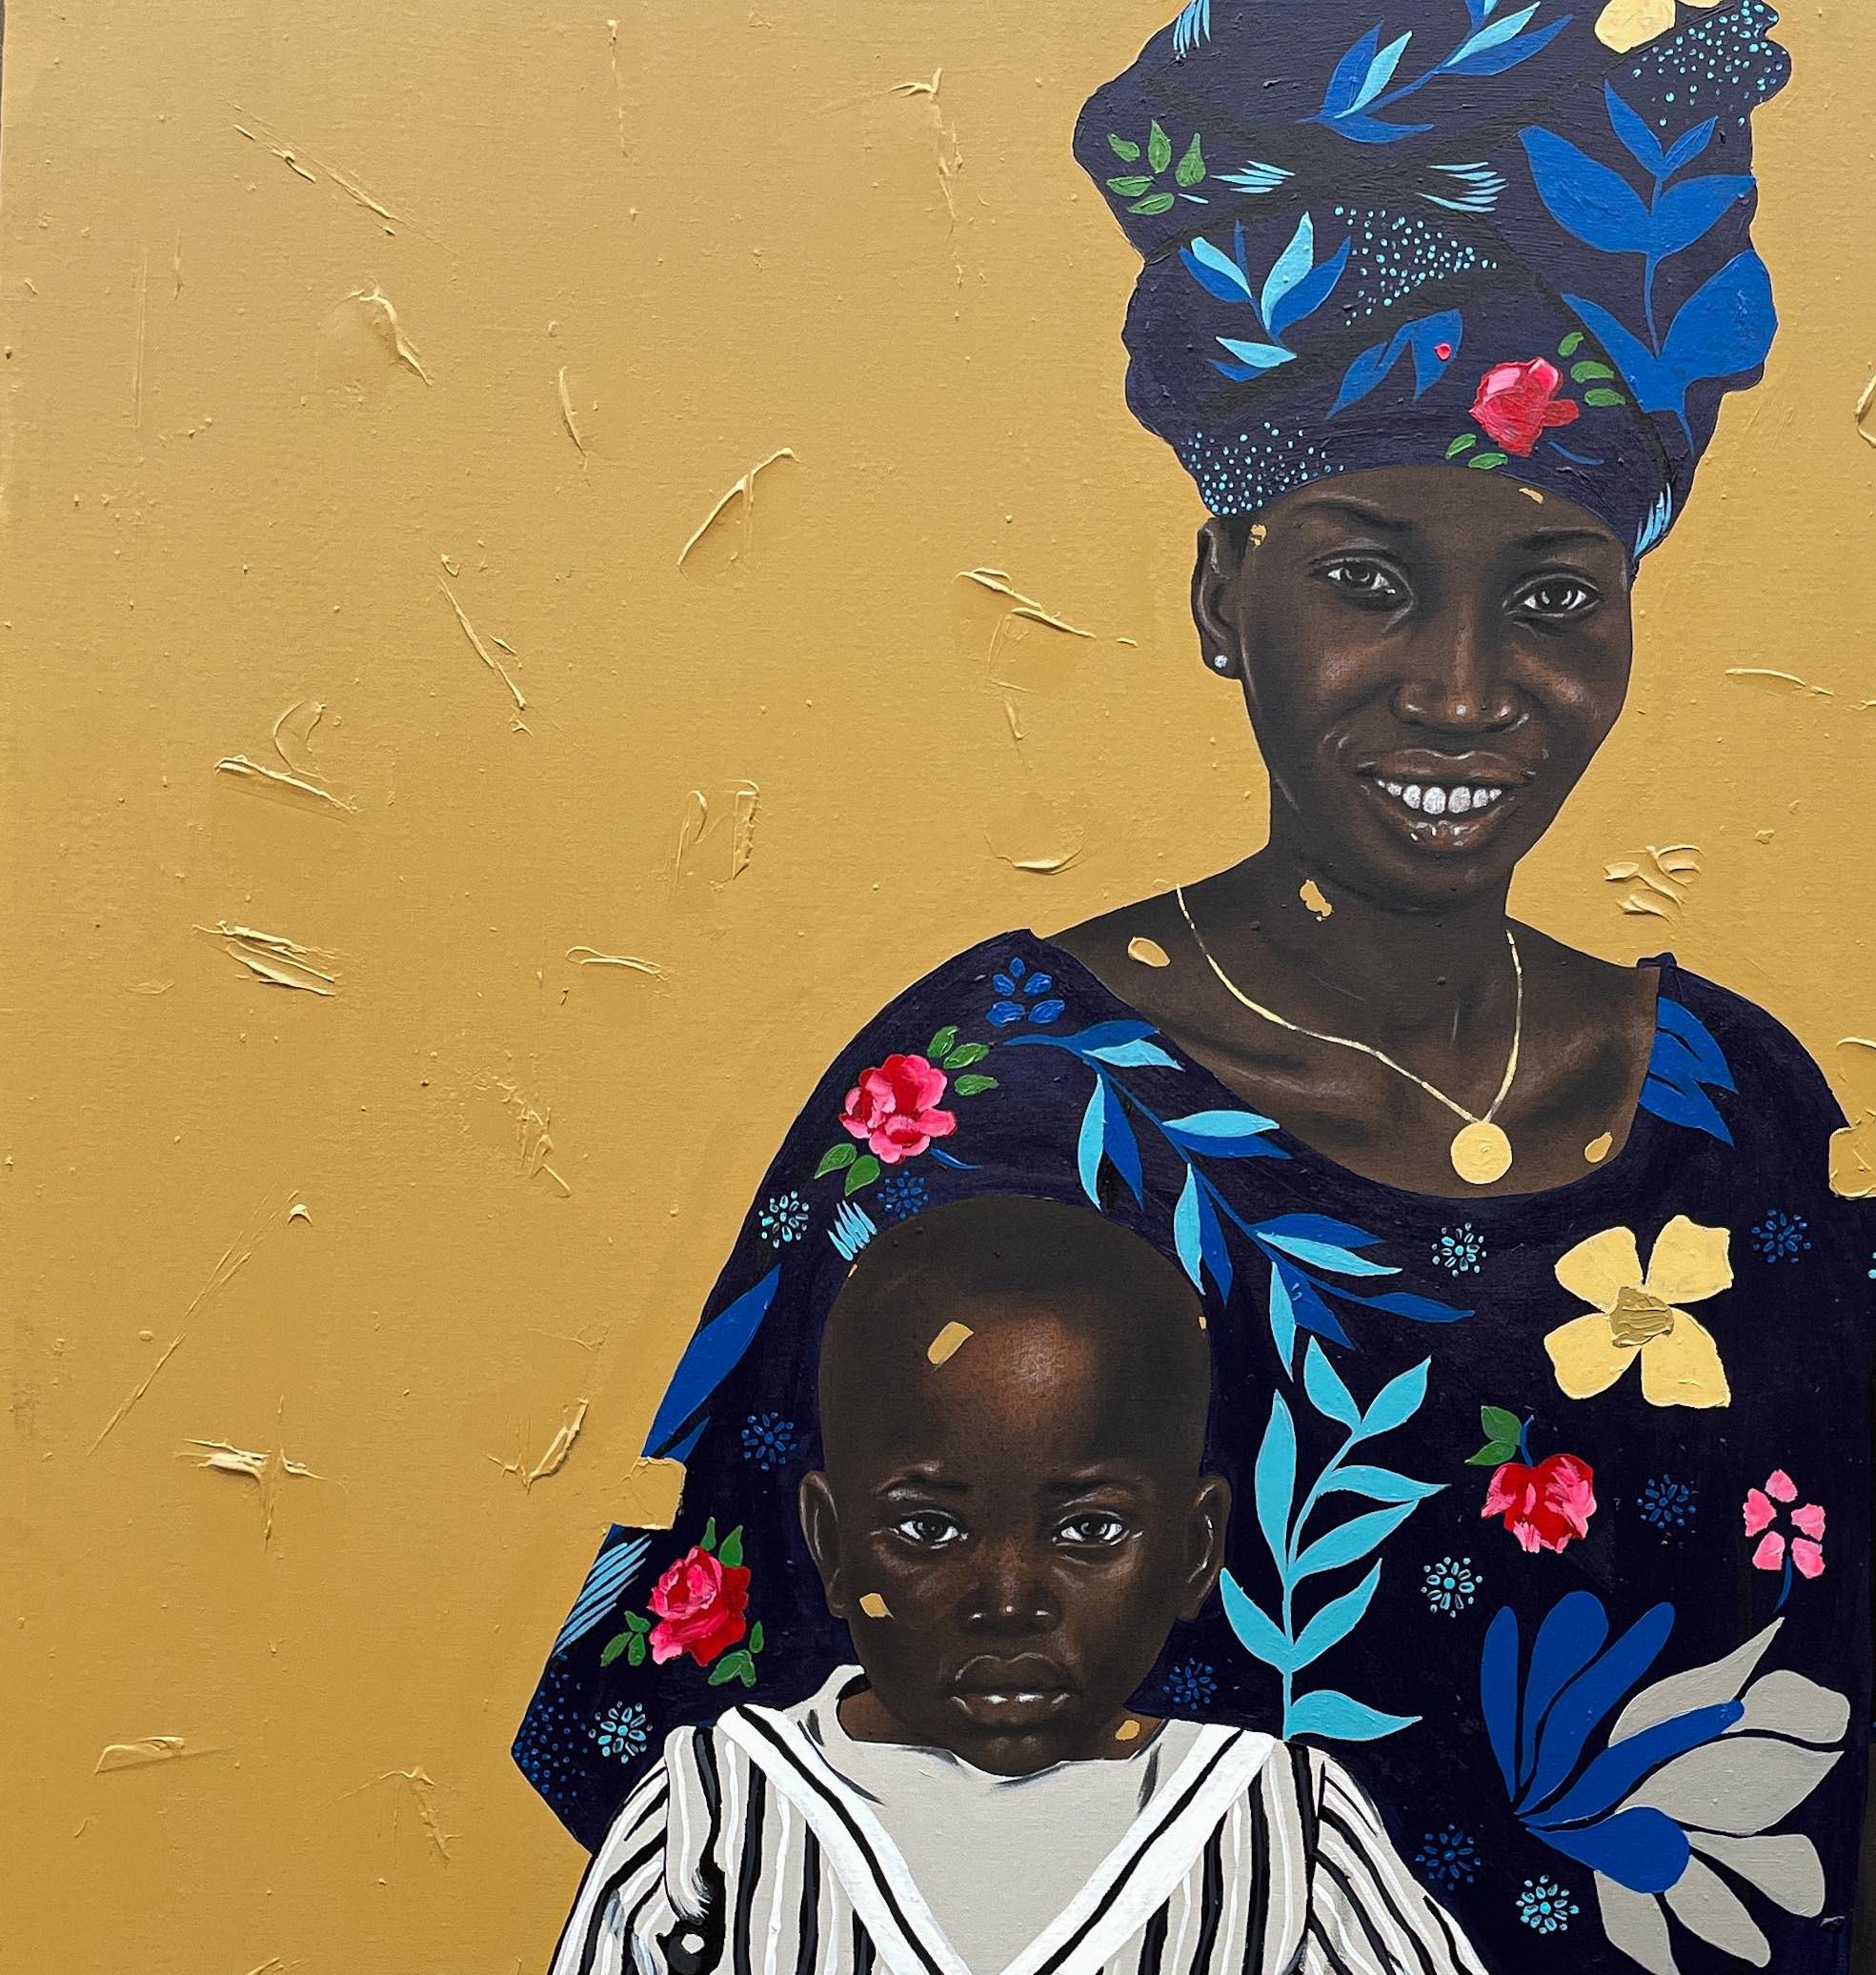 Mother and Child - Contemporary Mixed Media Art by Eyitayo Alagbe